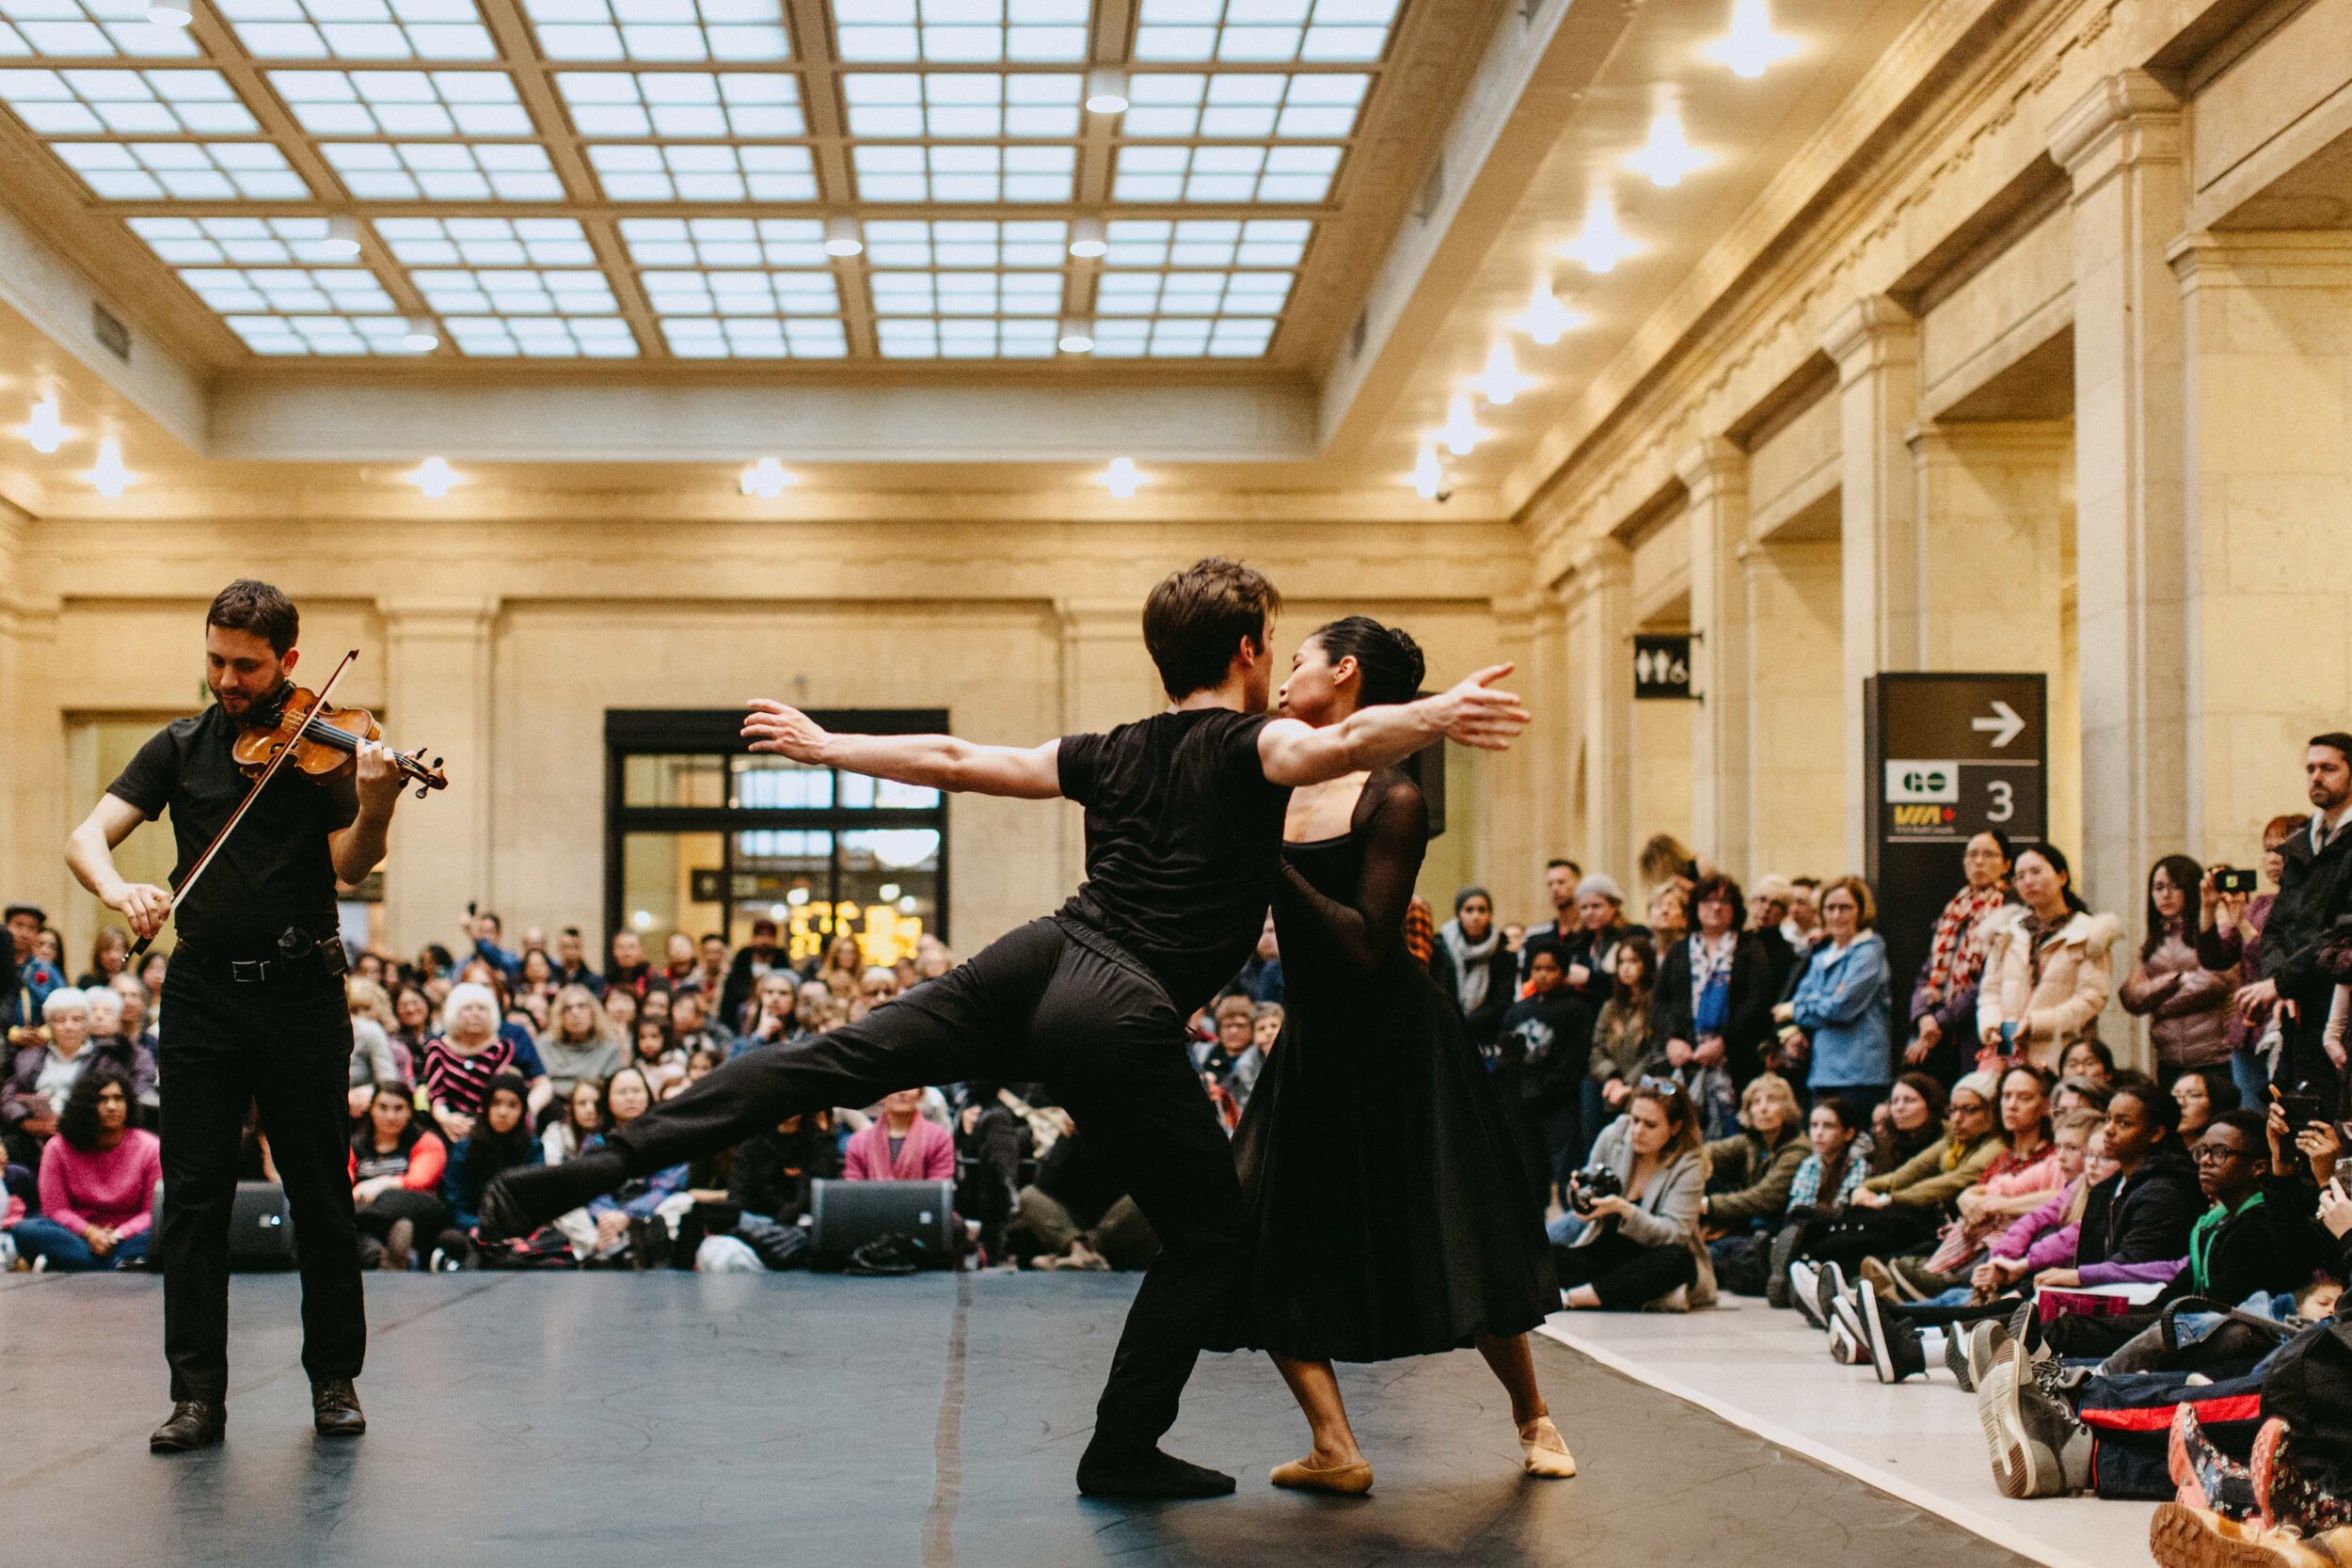 The National Ballet of Canada x Union Station